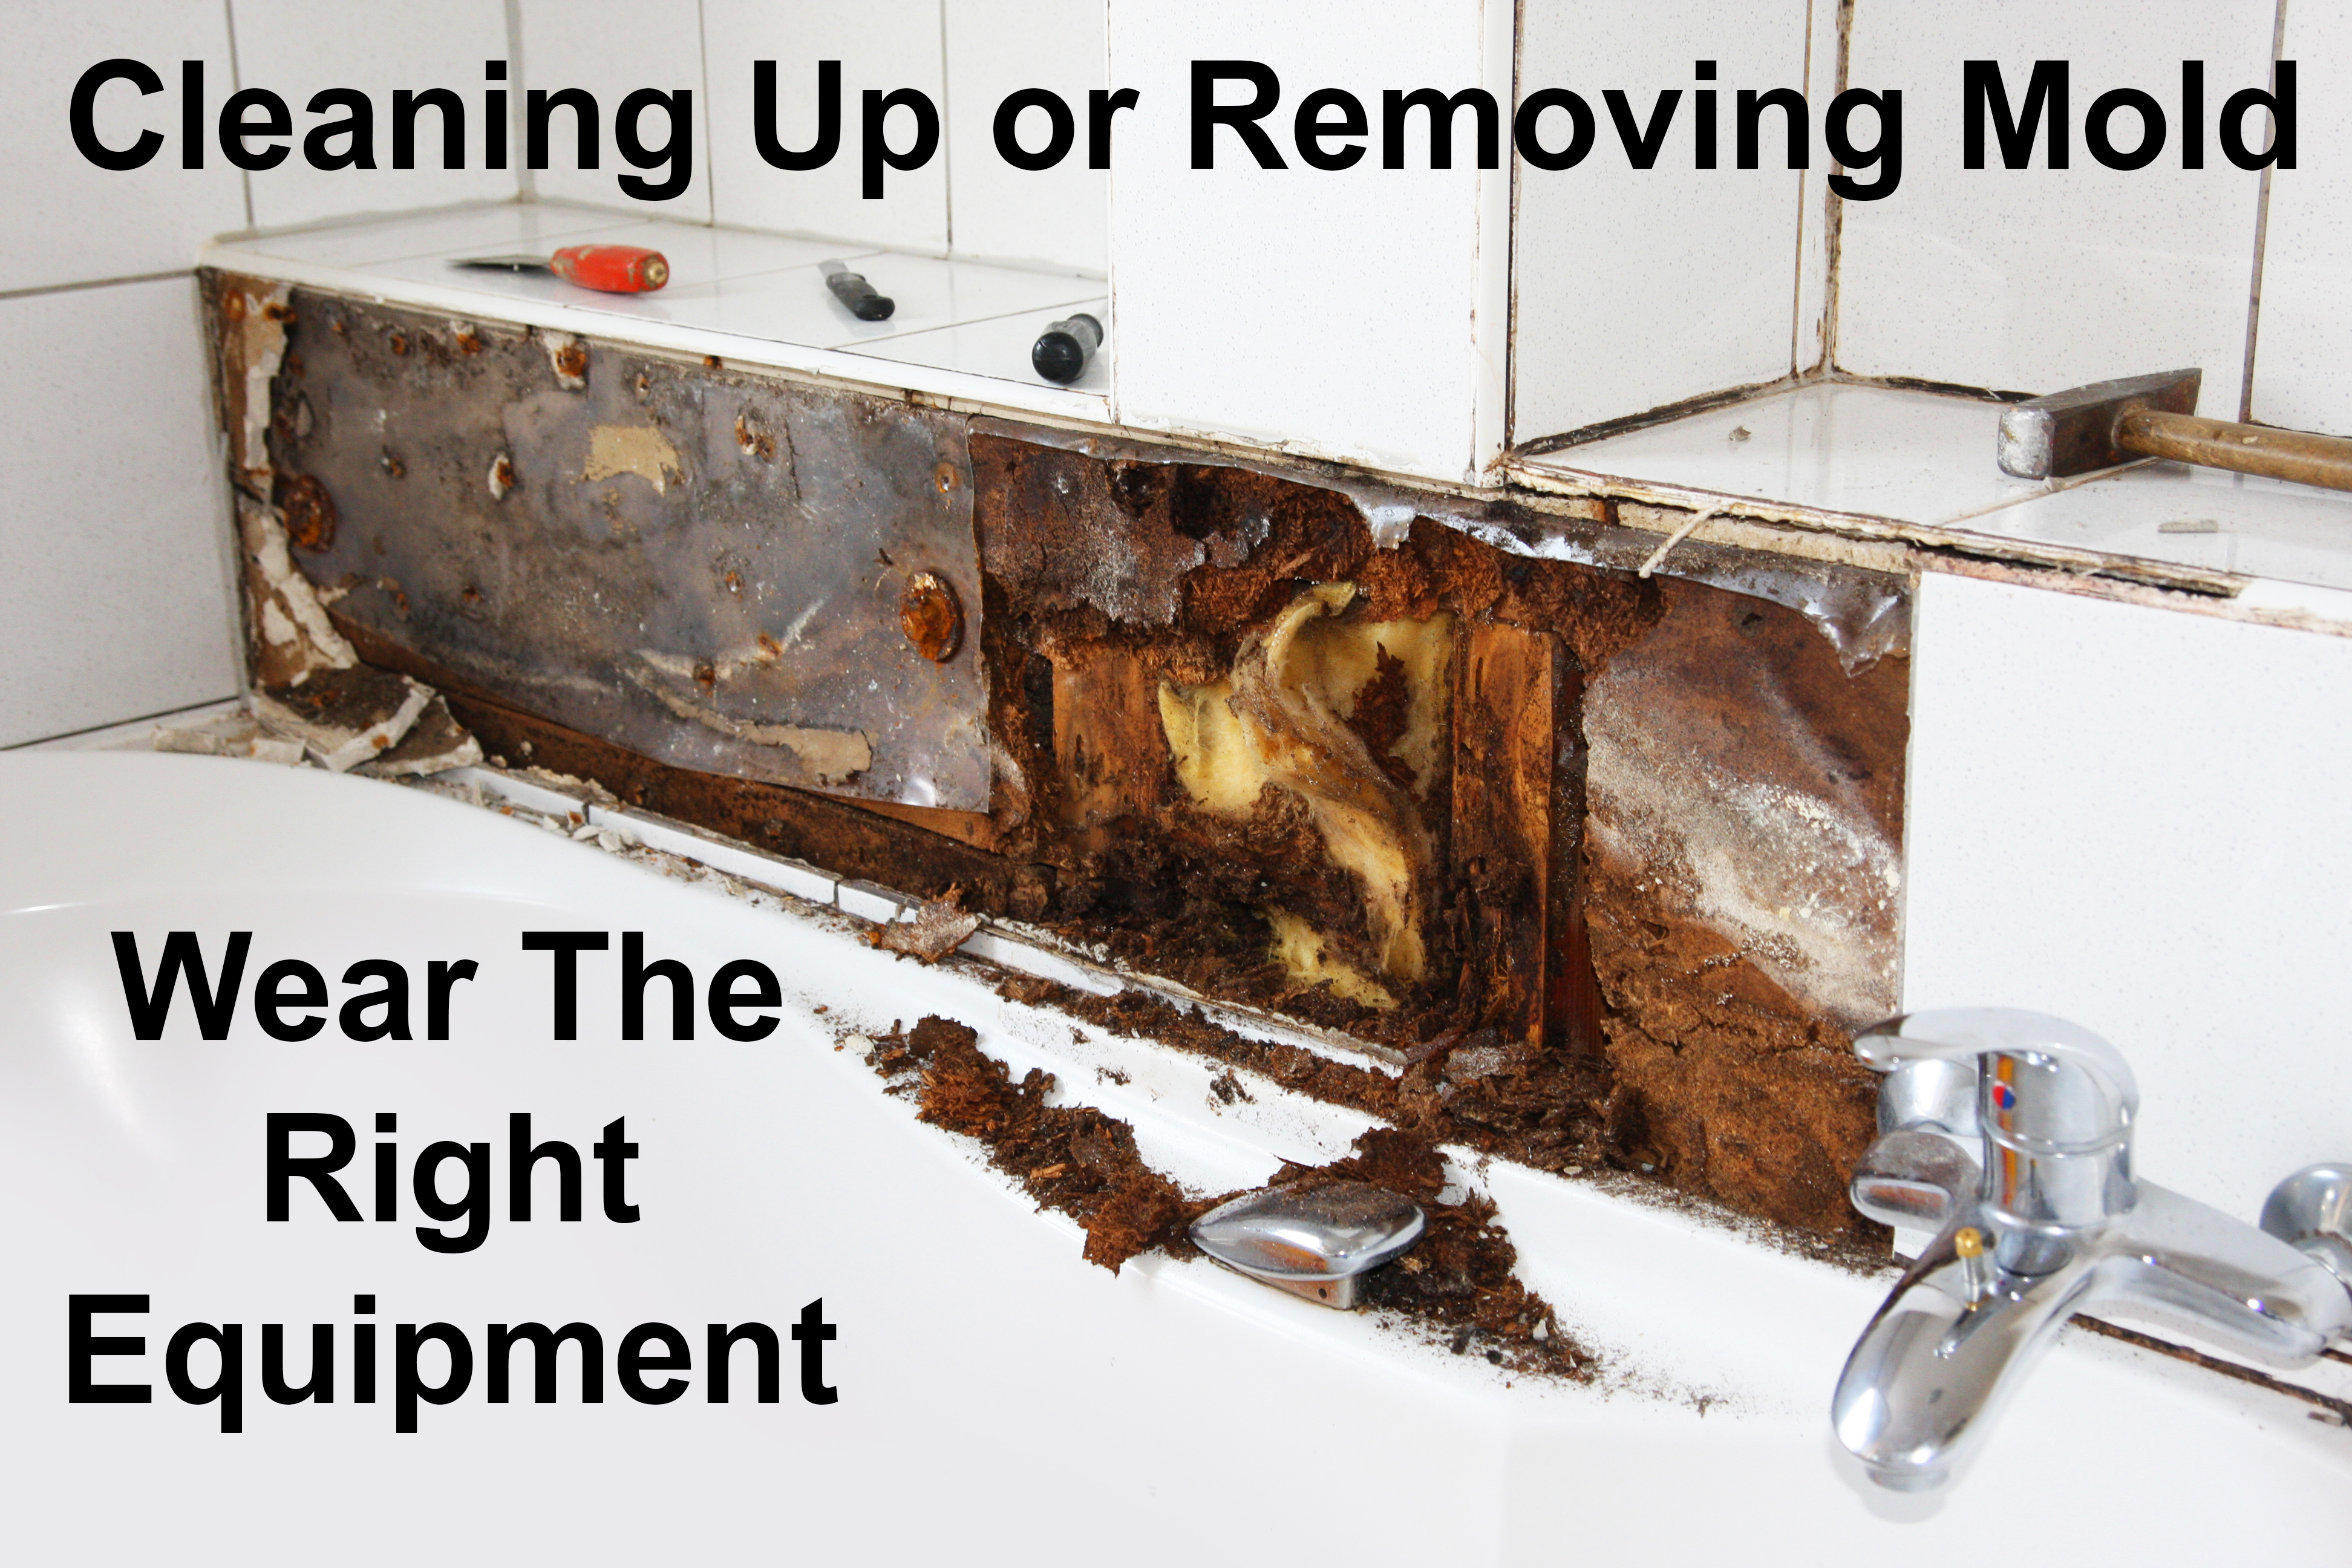 What to wear when removing mold